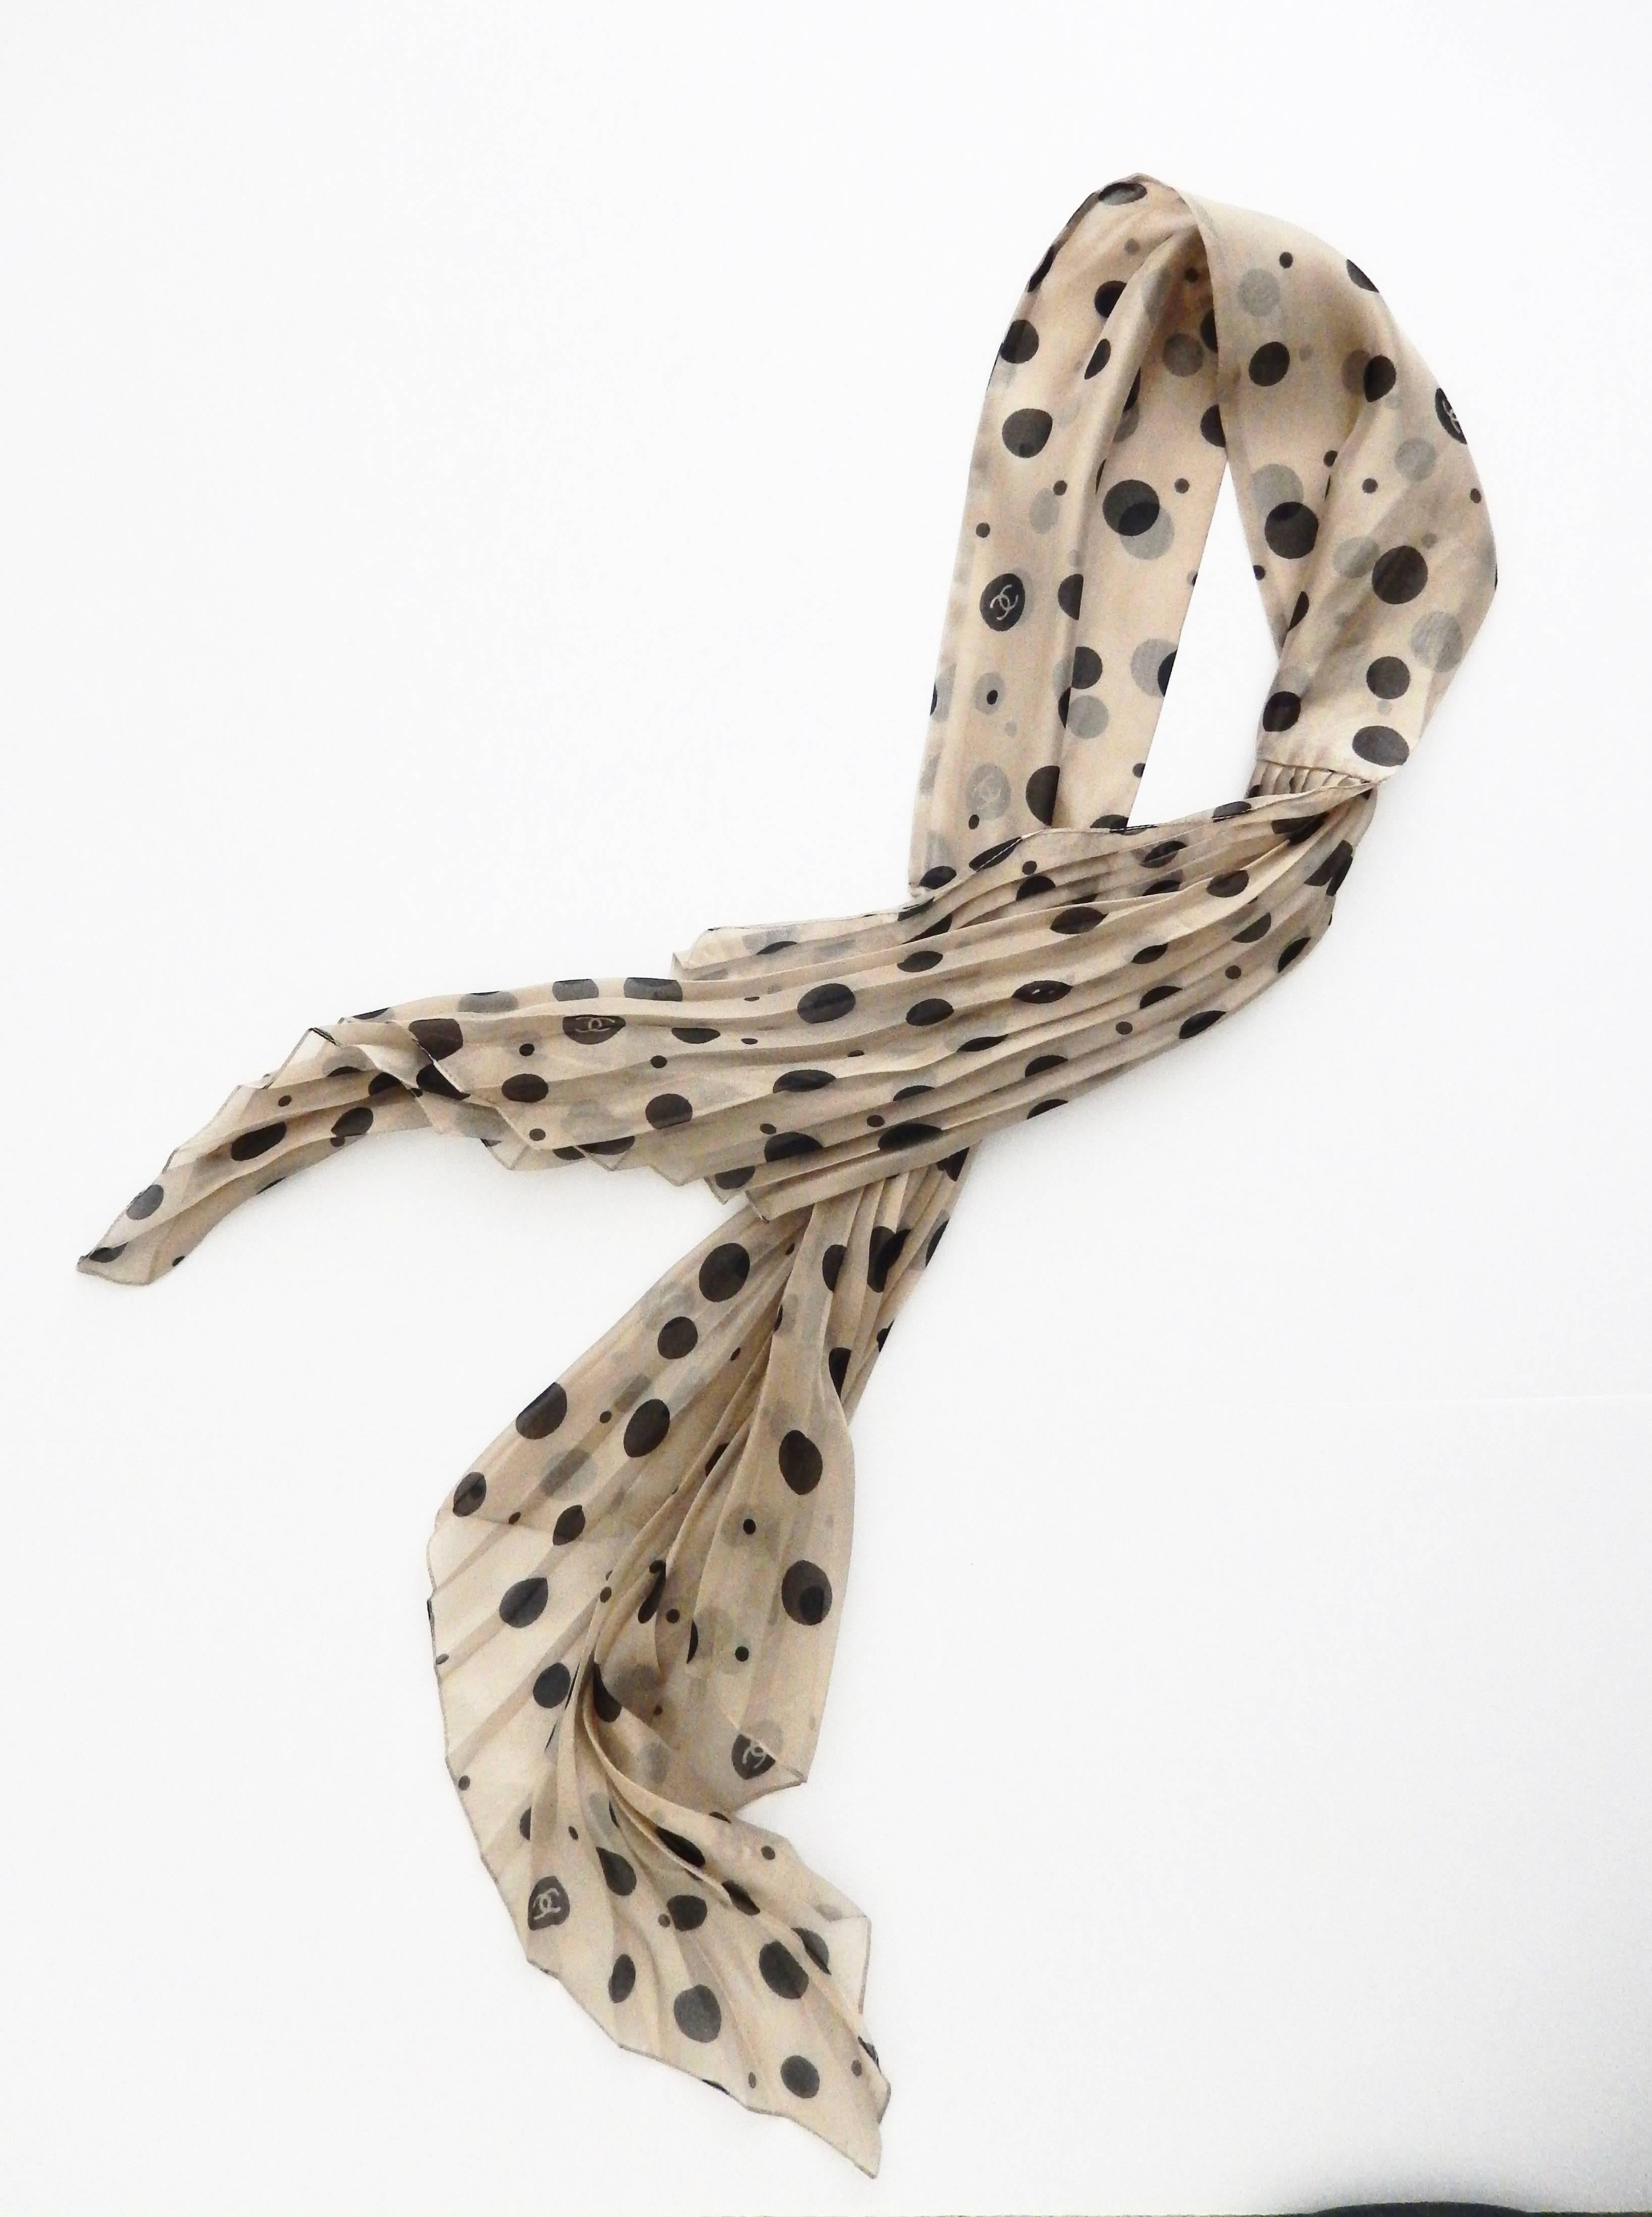 An elegant, vintage pleated scarf by Chanel in creme silk with black polka dots.  Chanel logo is incorporated into pattern.  The scarf has a delicate, subtle couture look and is very easy to wear.